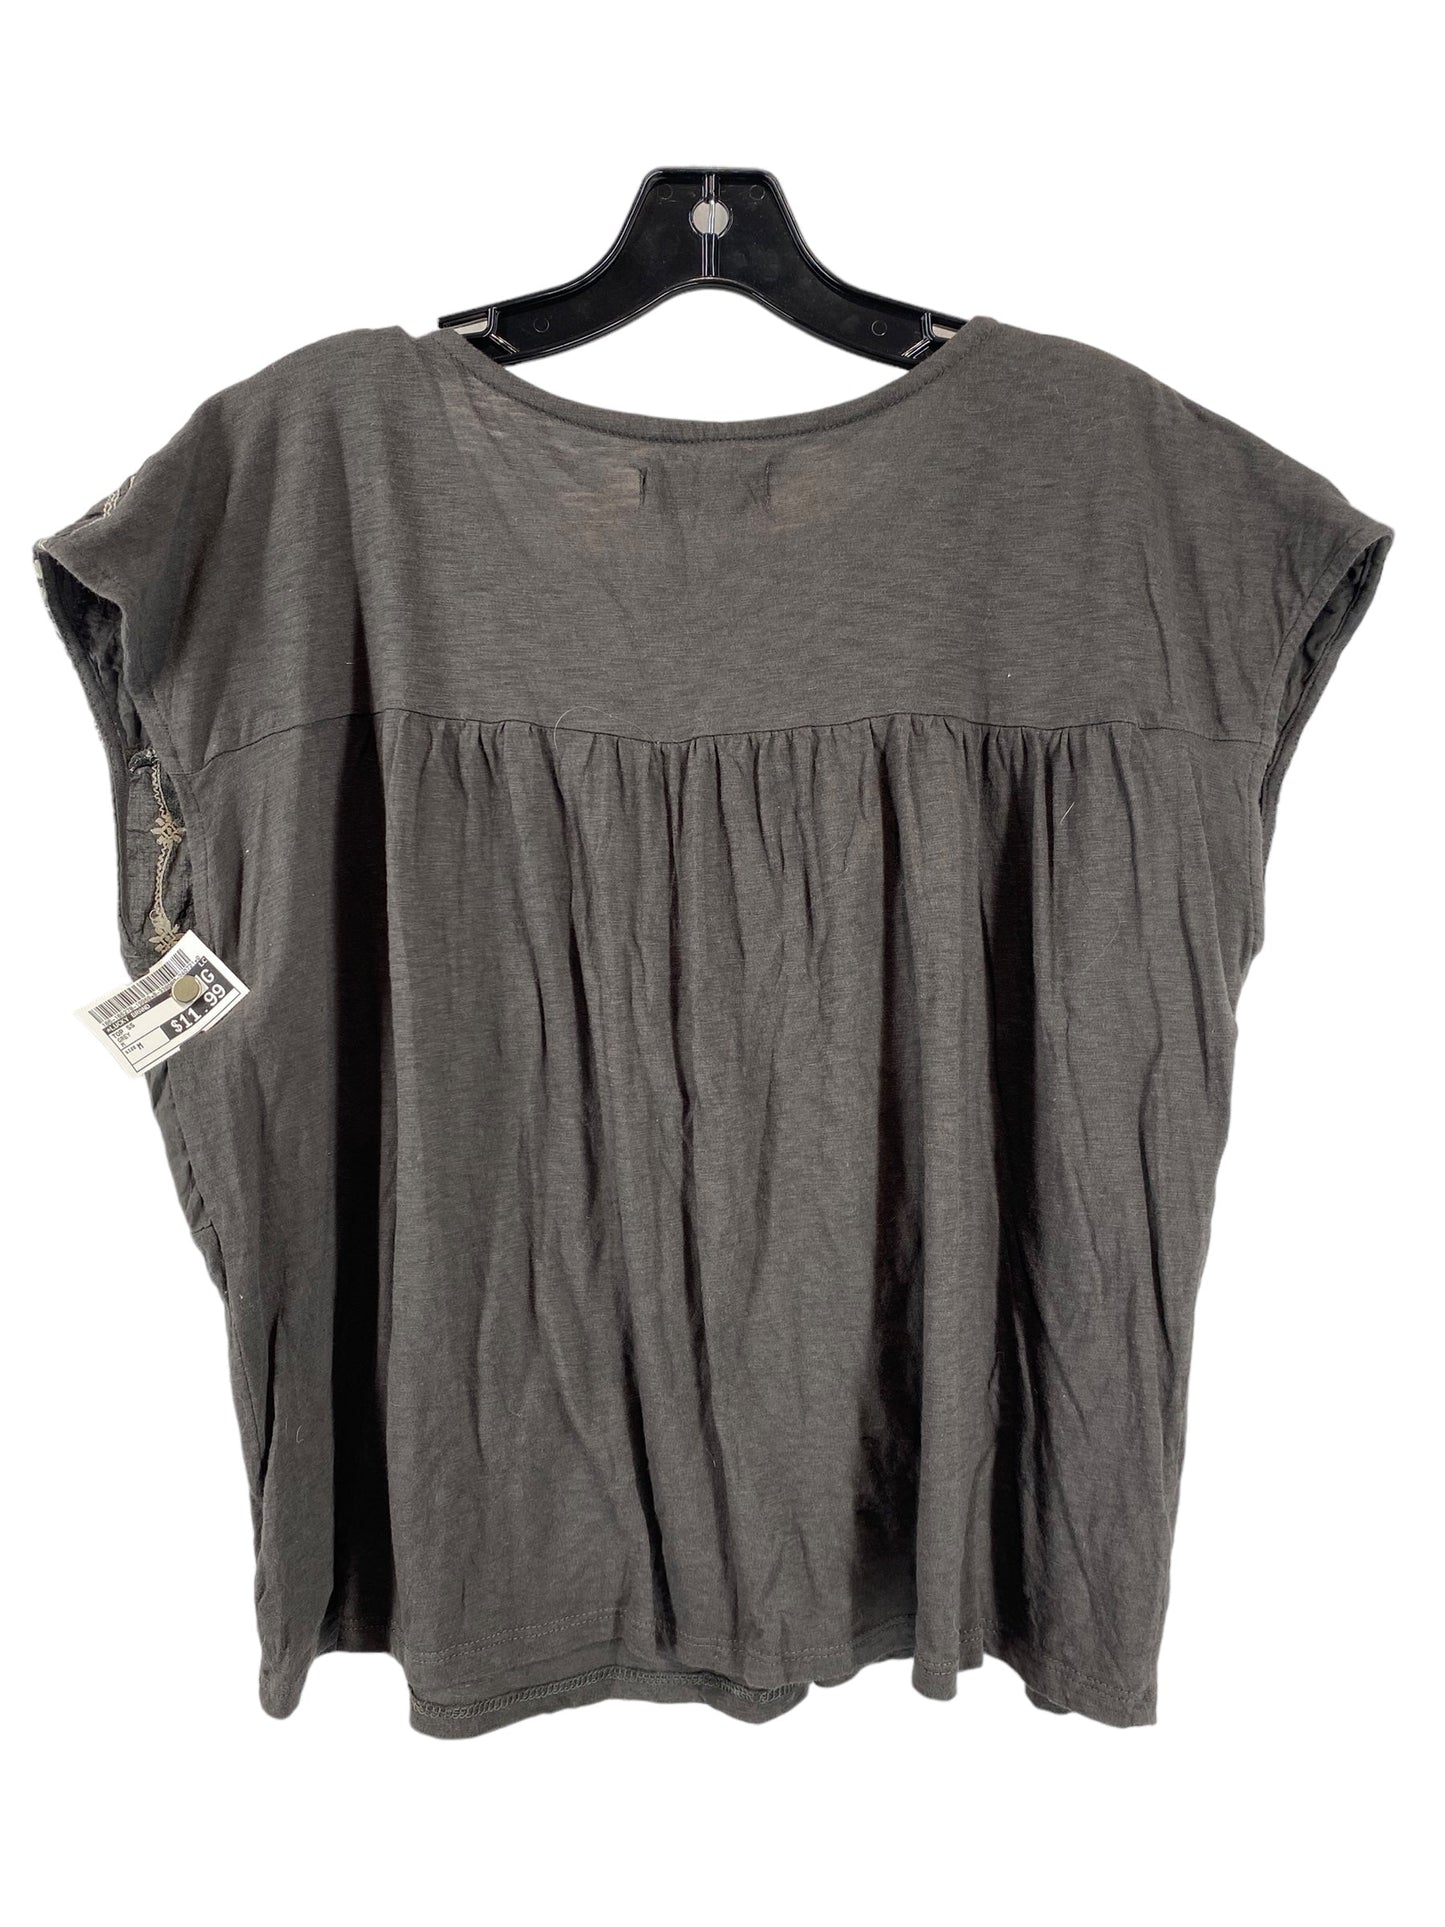 Grey Top Short Sleeve Lucky Brand, Size M